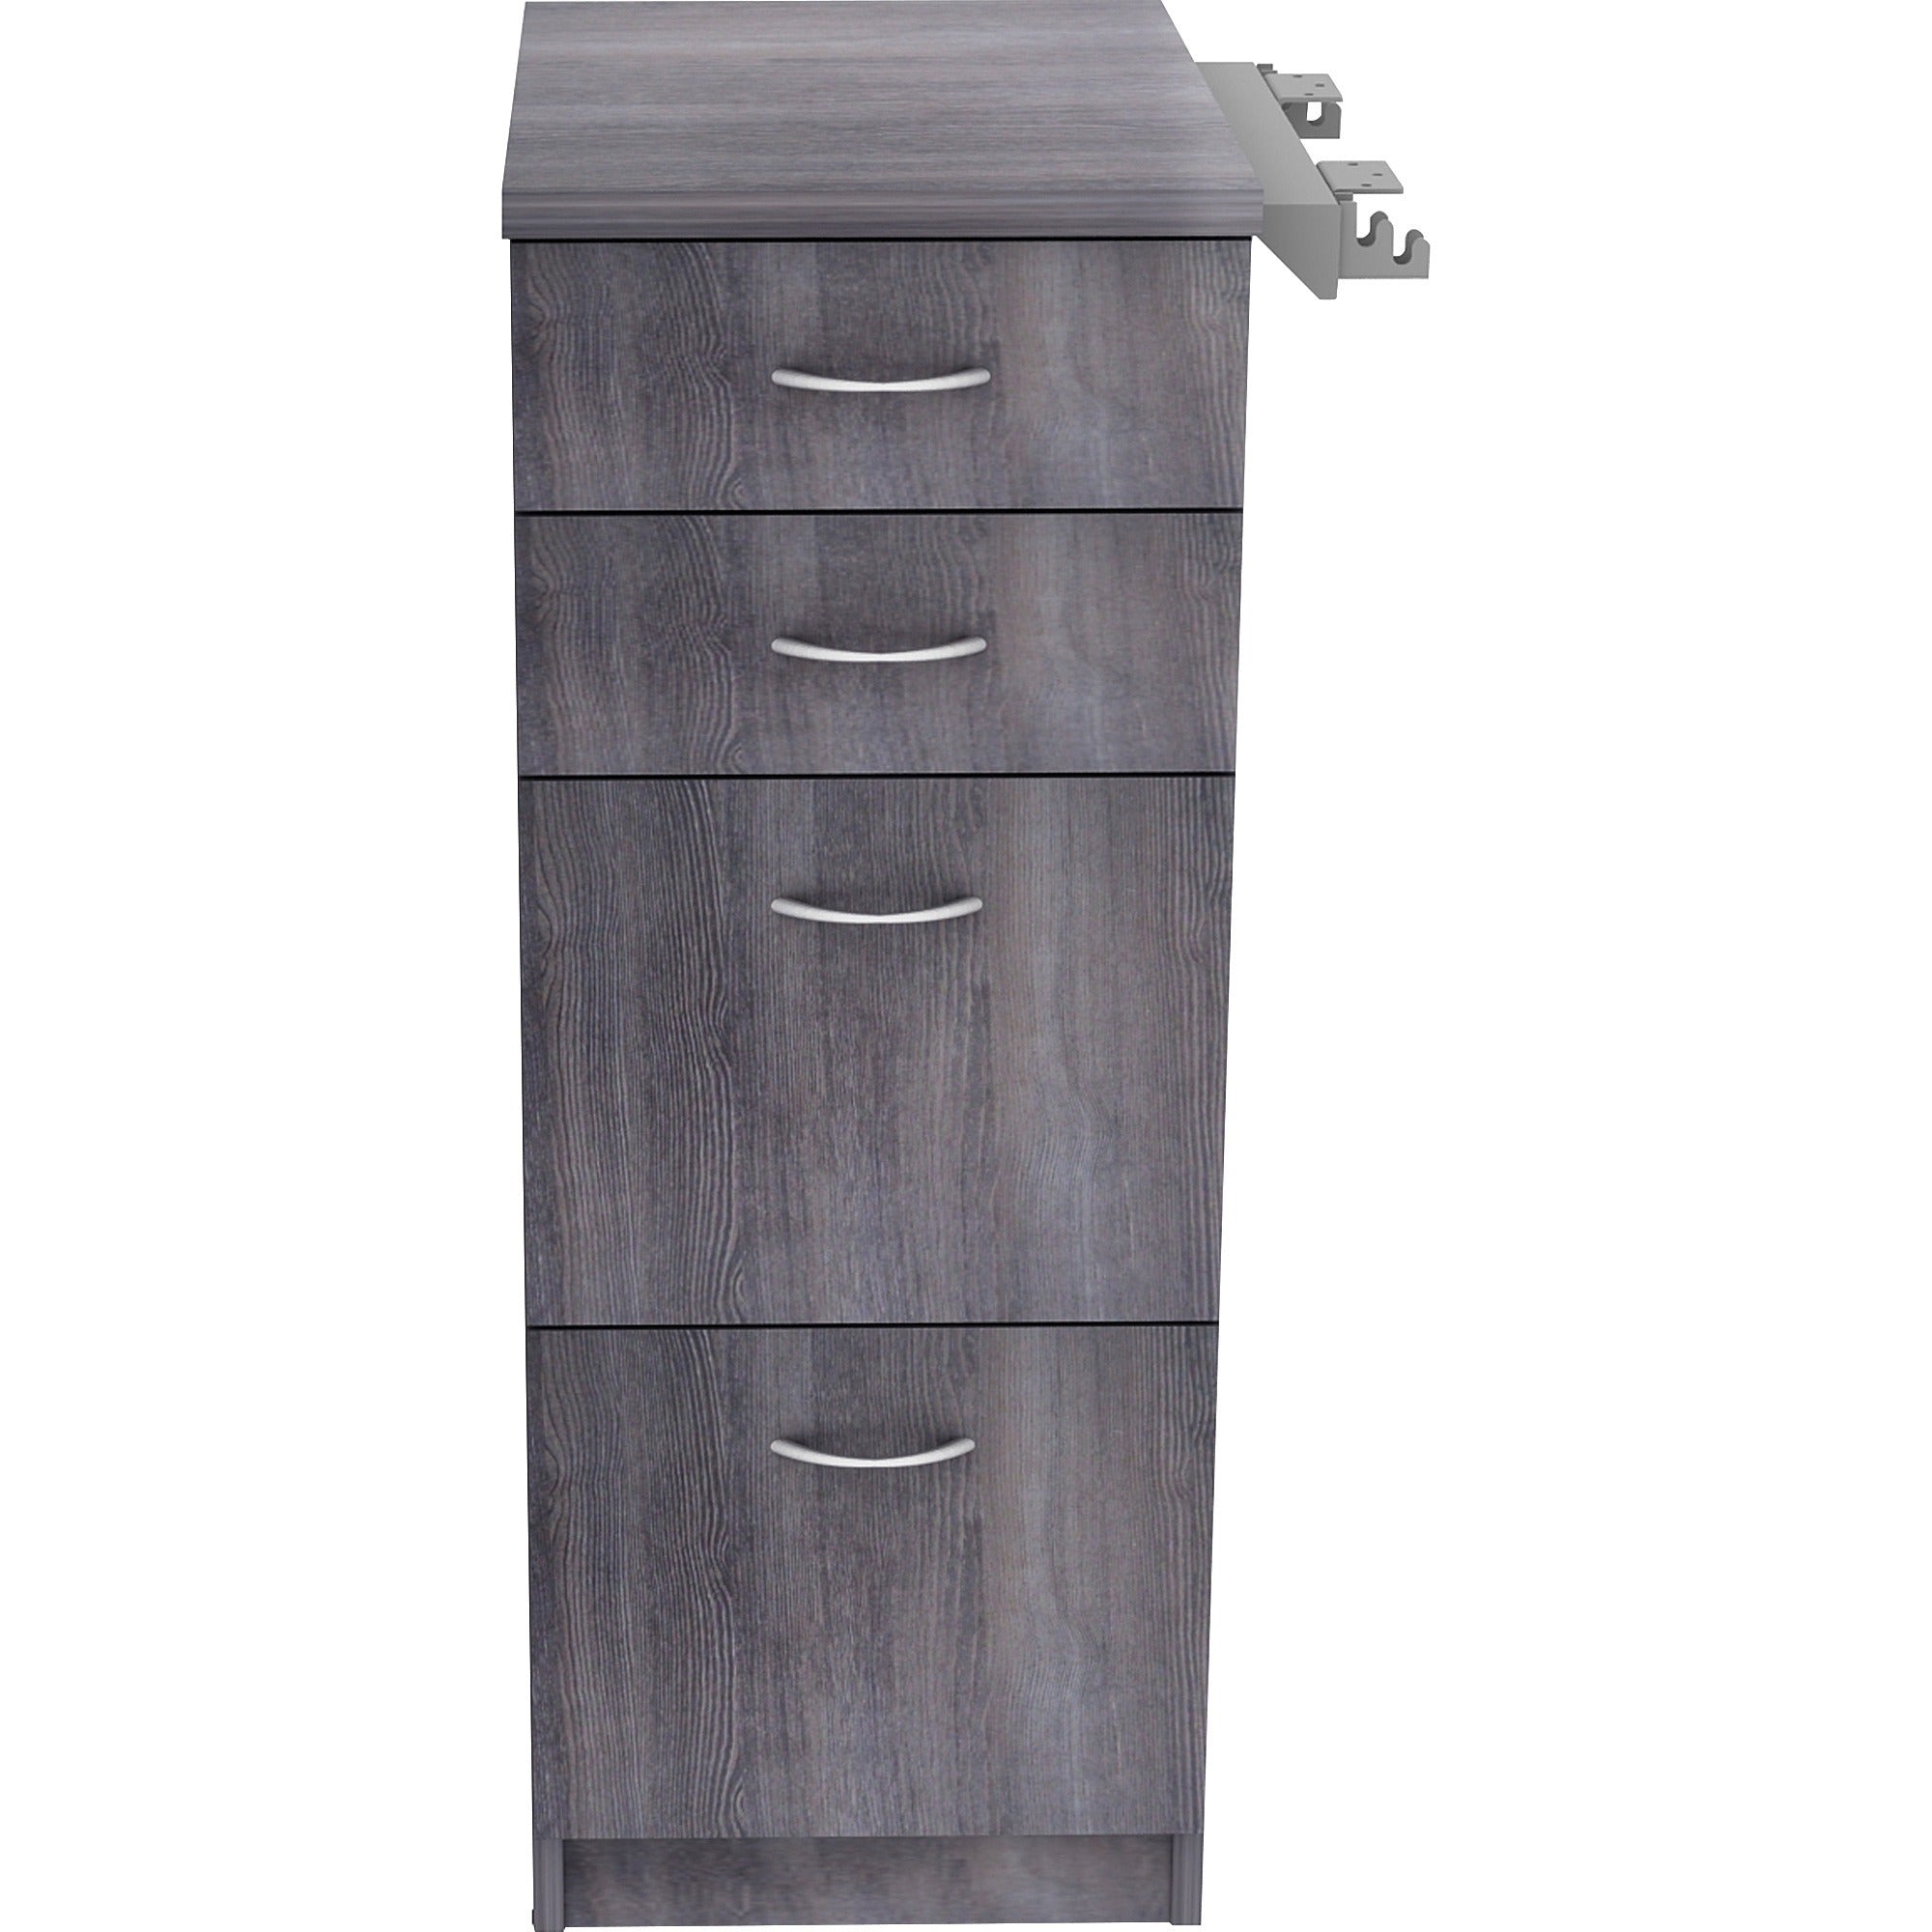 lorell-relevance-series-4-drawer-file-cabinet-155-x-236404-4-x-file-box-drawers-finish-charcoal-laminate_llr16211 - 2